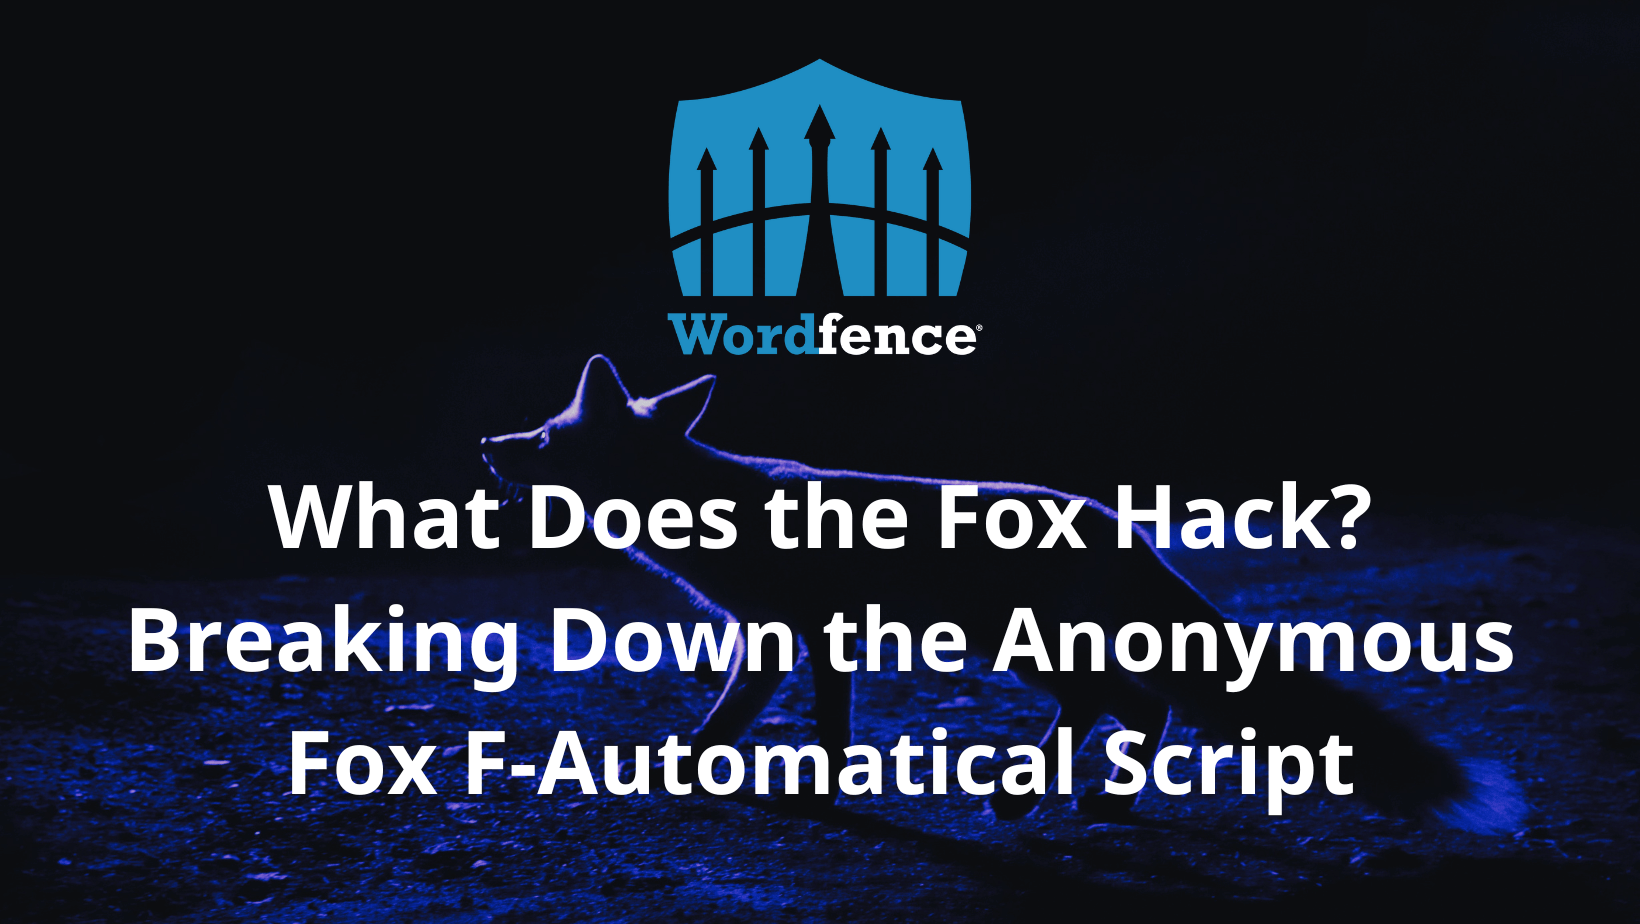 What Does The Fox Hack? Breaking Down the Anonymous Fox F-Automatical Script